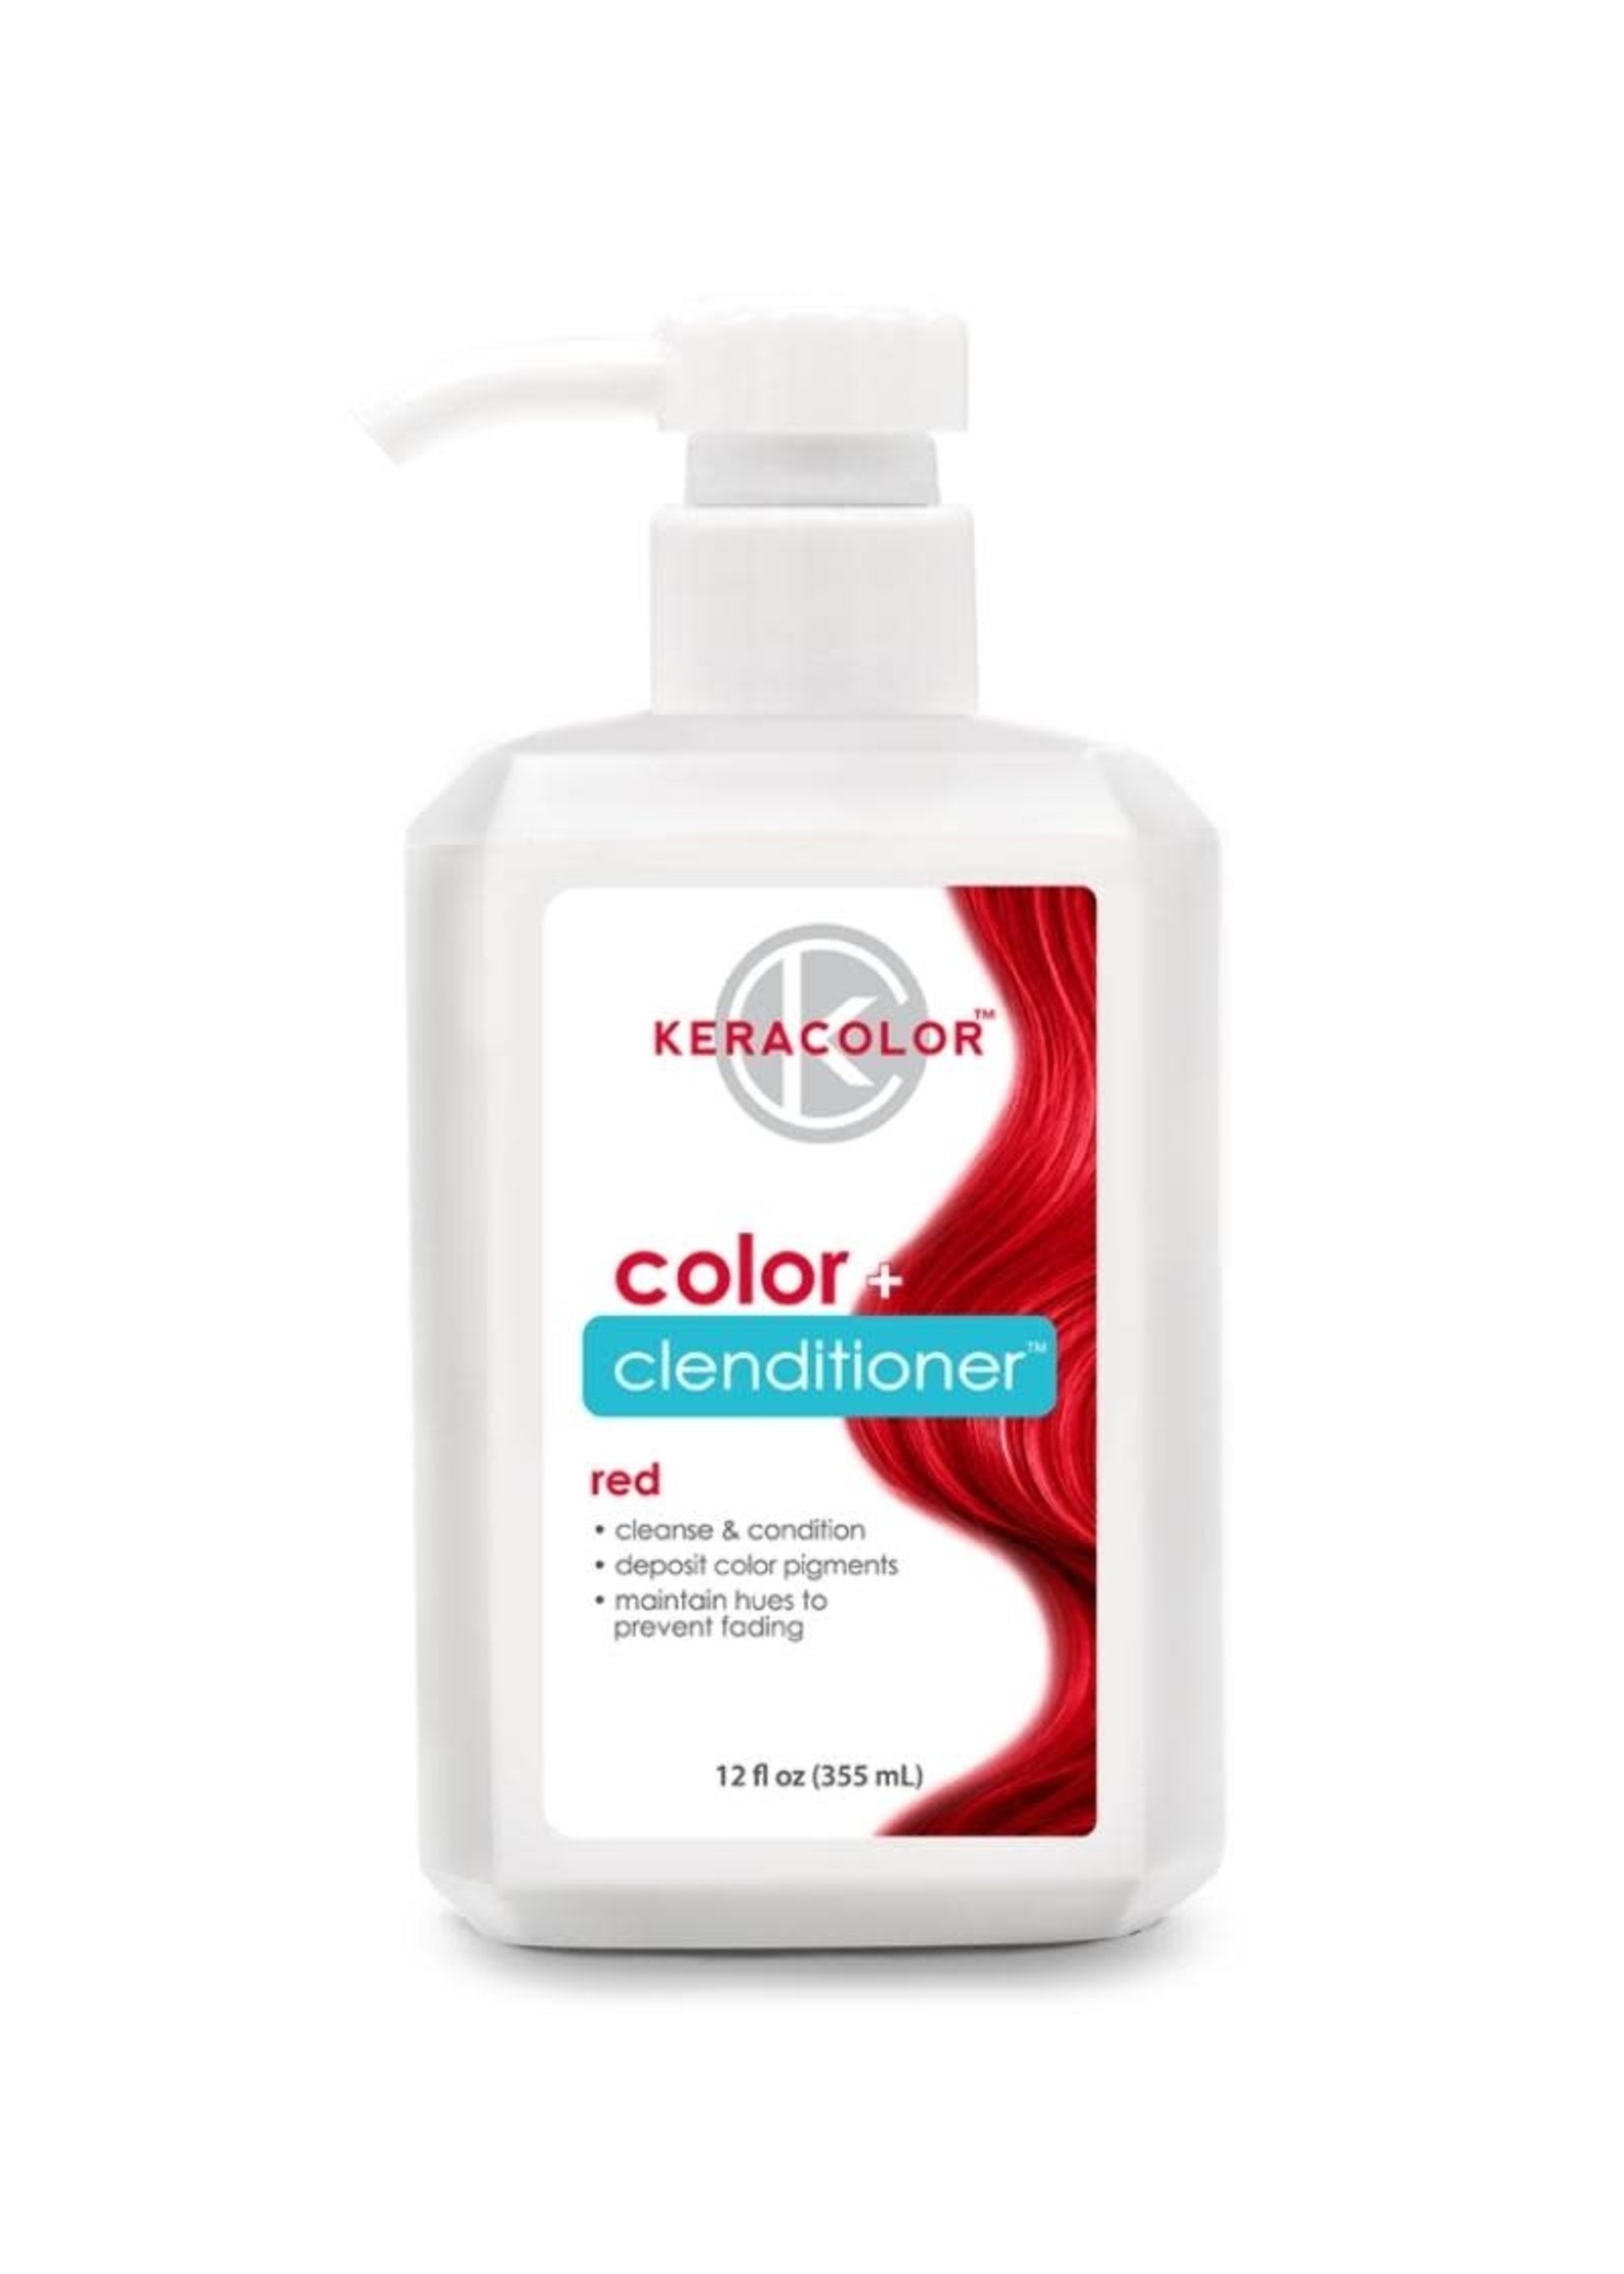 Keracolor Keracolor Color + Clenditioner Red 355ml